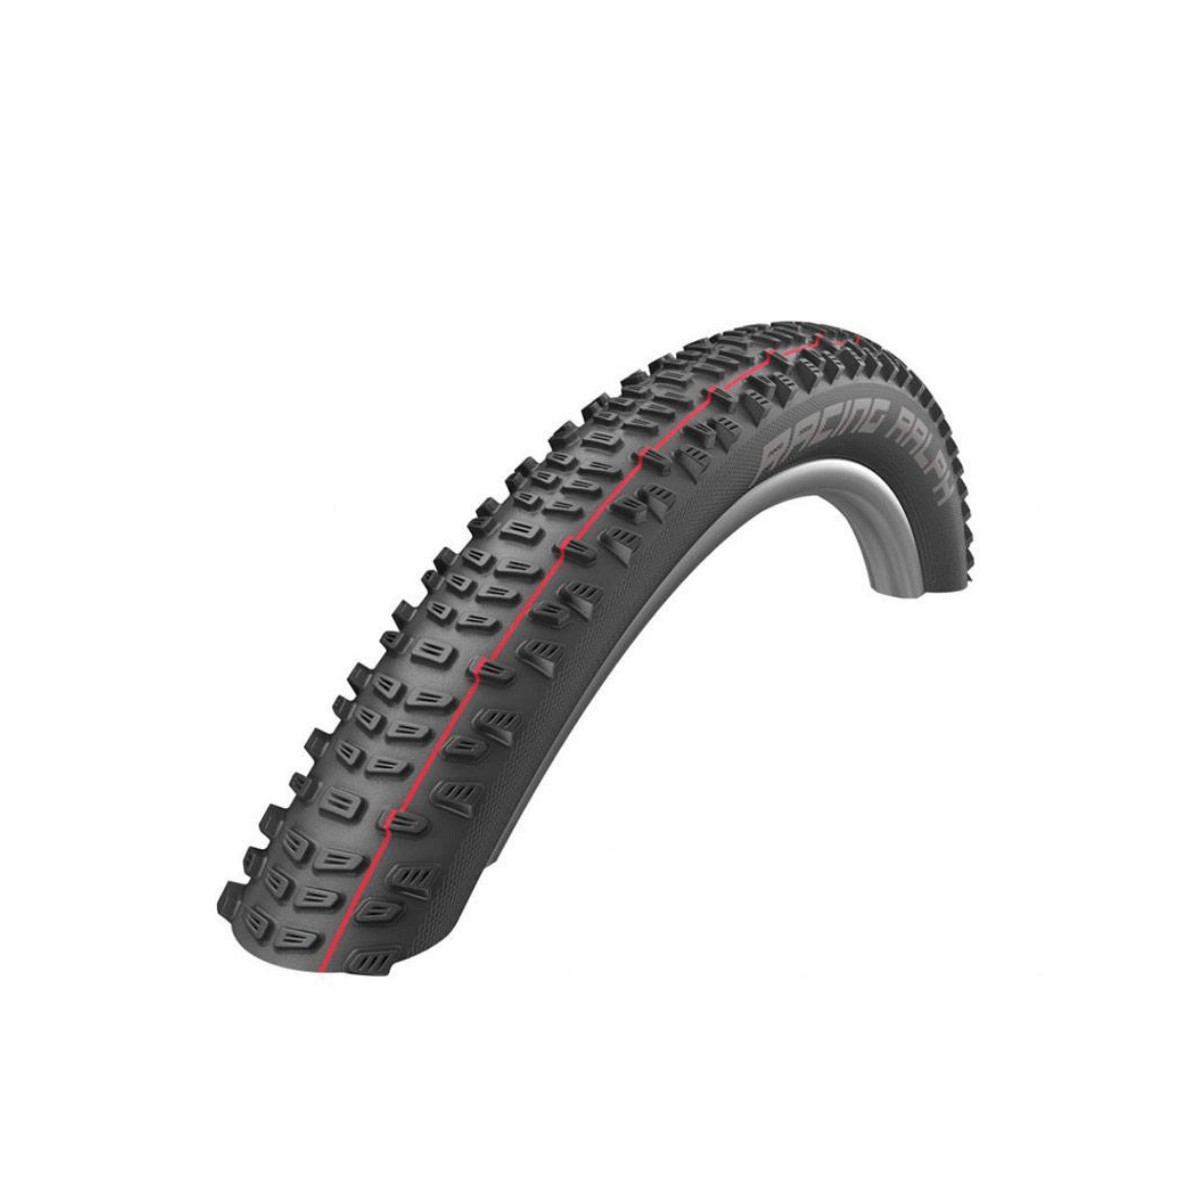 Schwalbe Tubeless Ready Tire - Racing Ralph 27,5 x 2,25 SnakeSkin 585gr Compound PSC